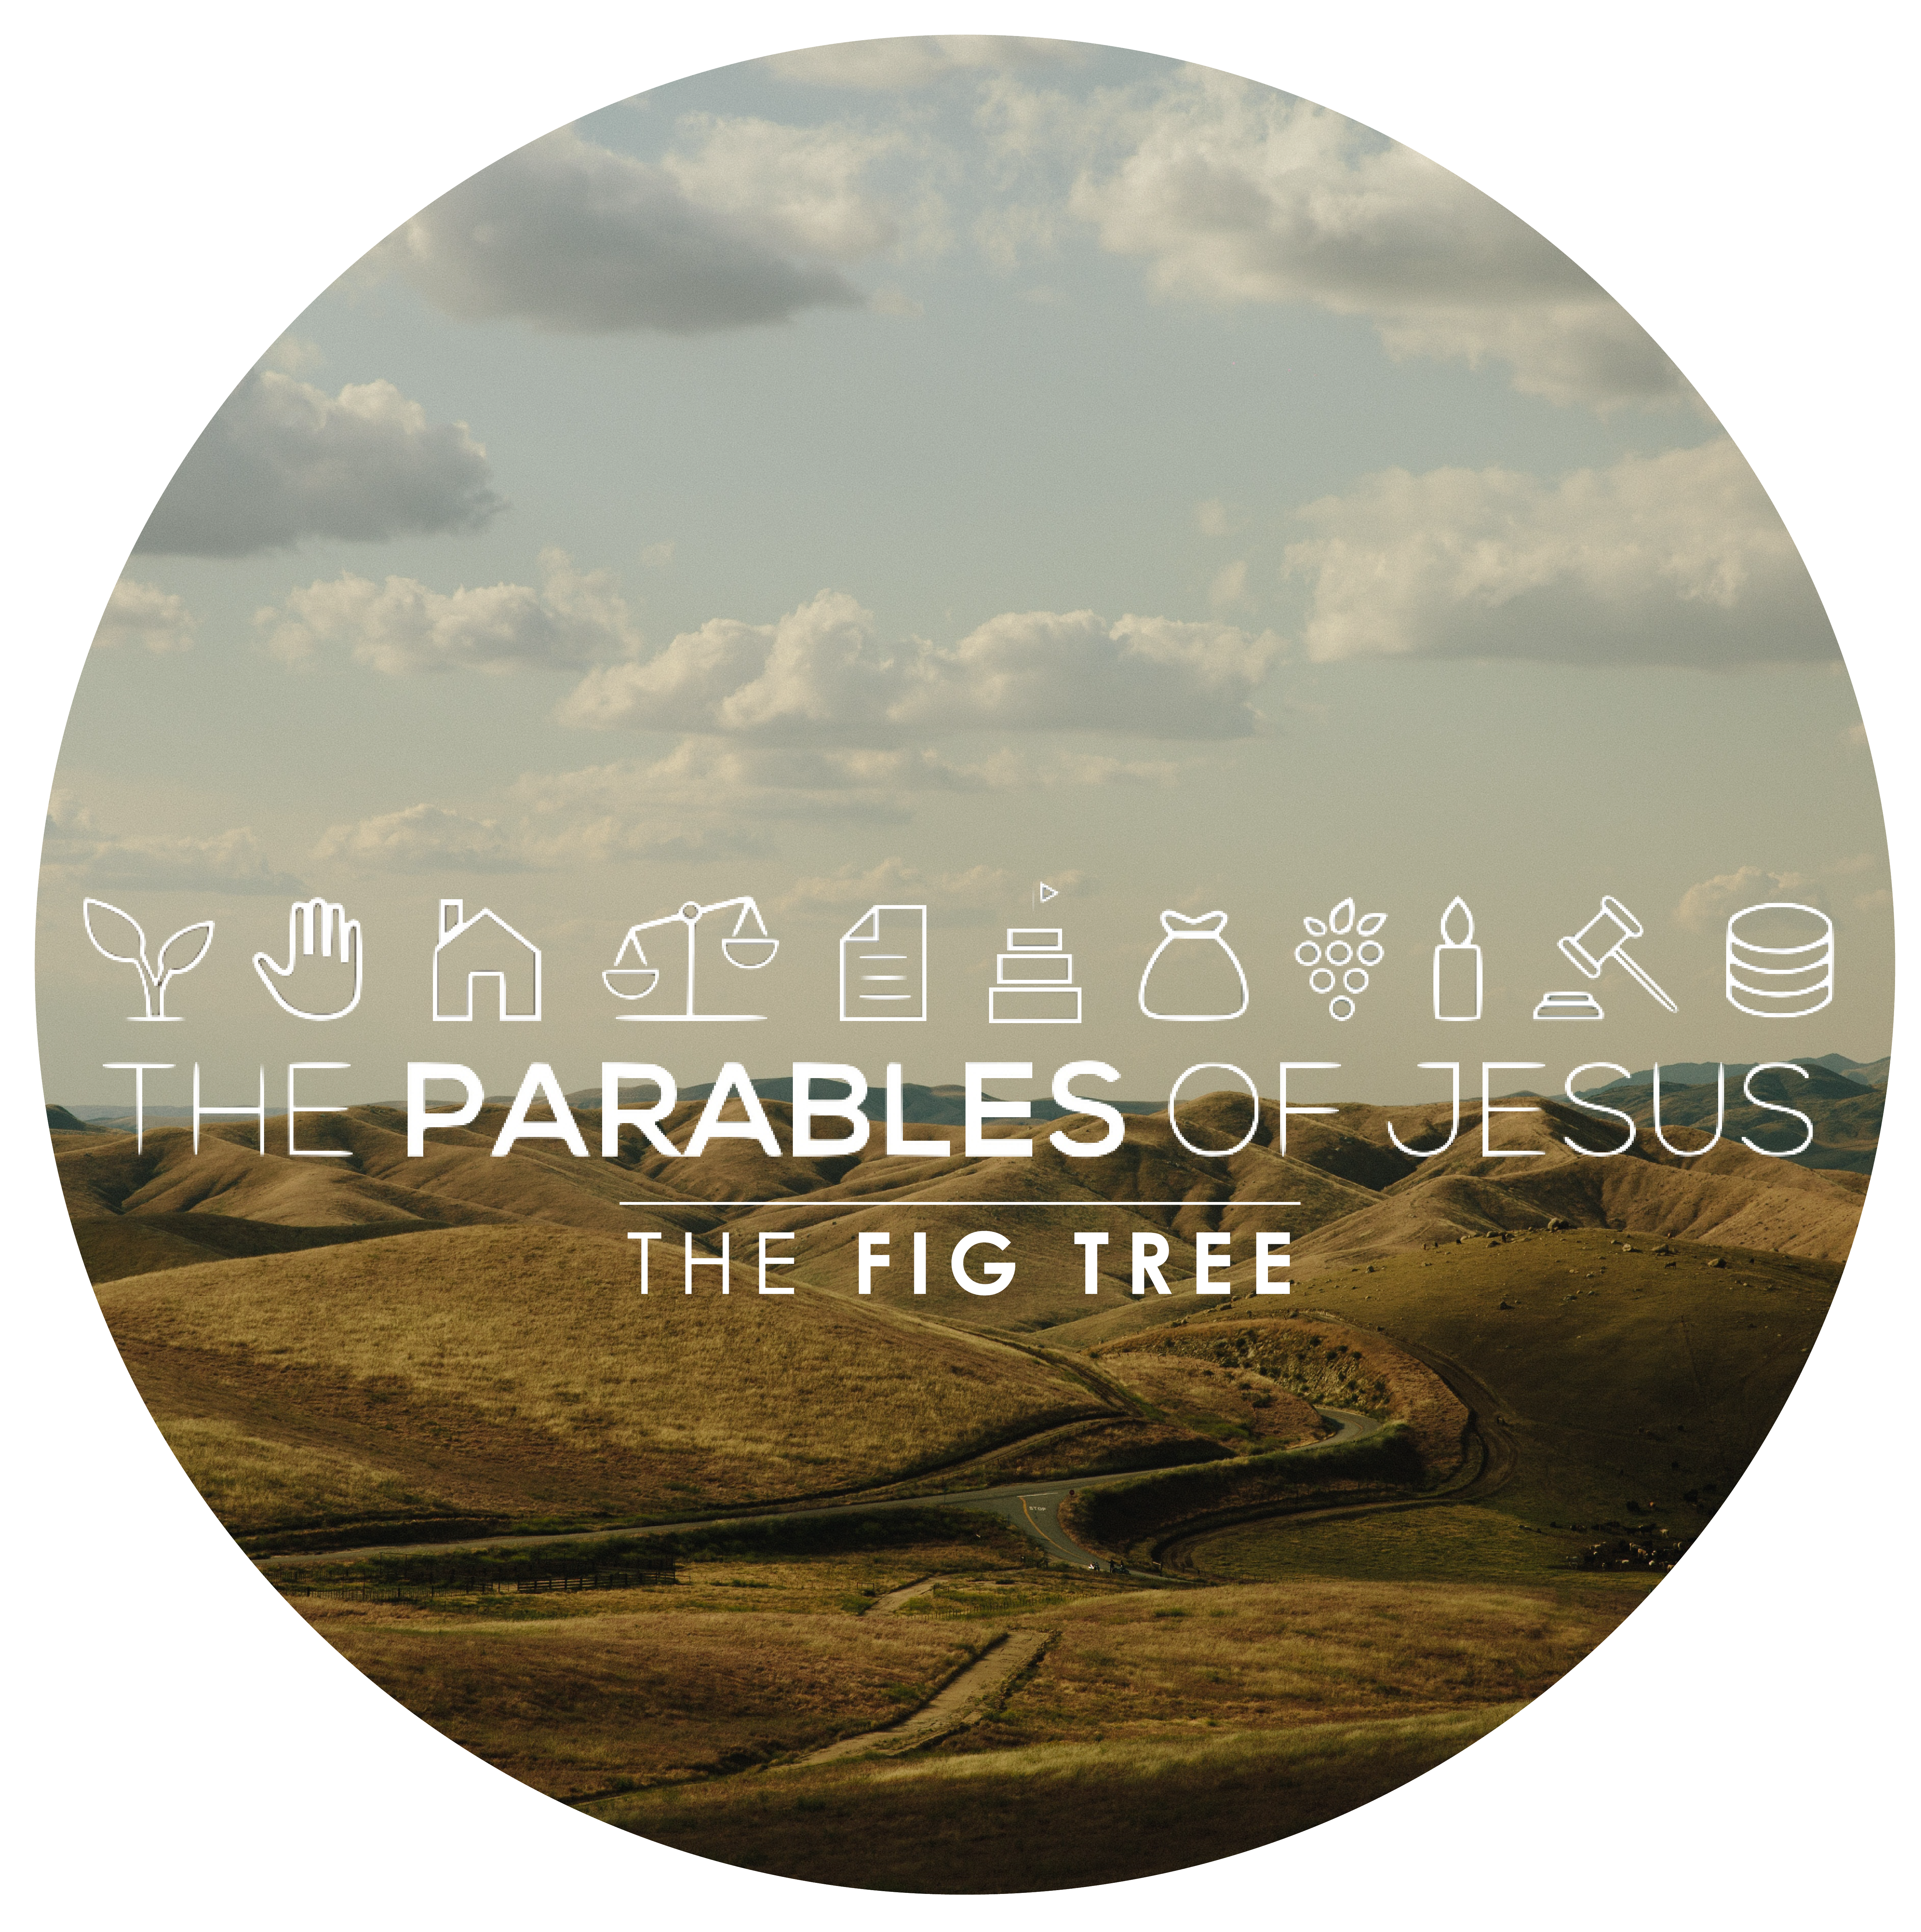 The Parables of Mark: The Fig Tree